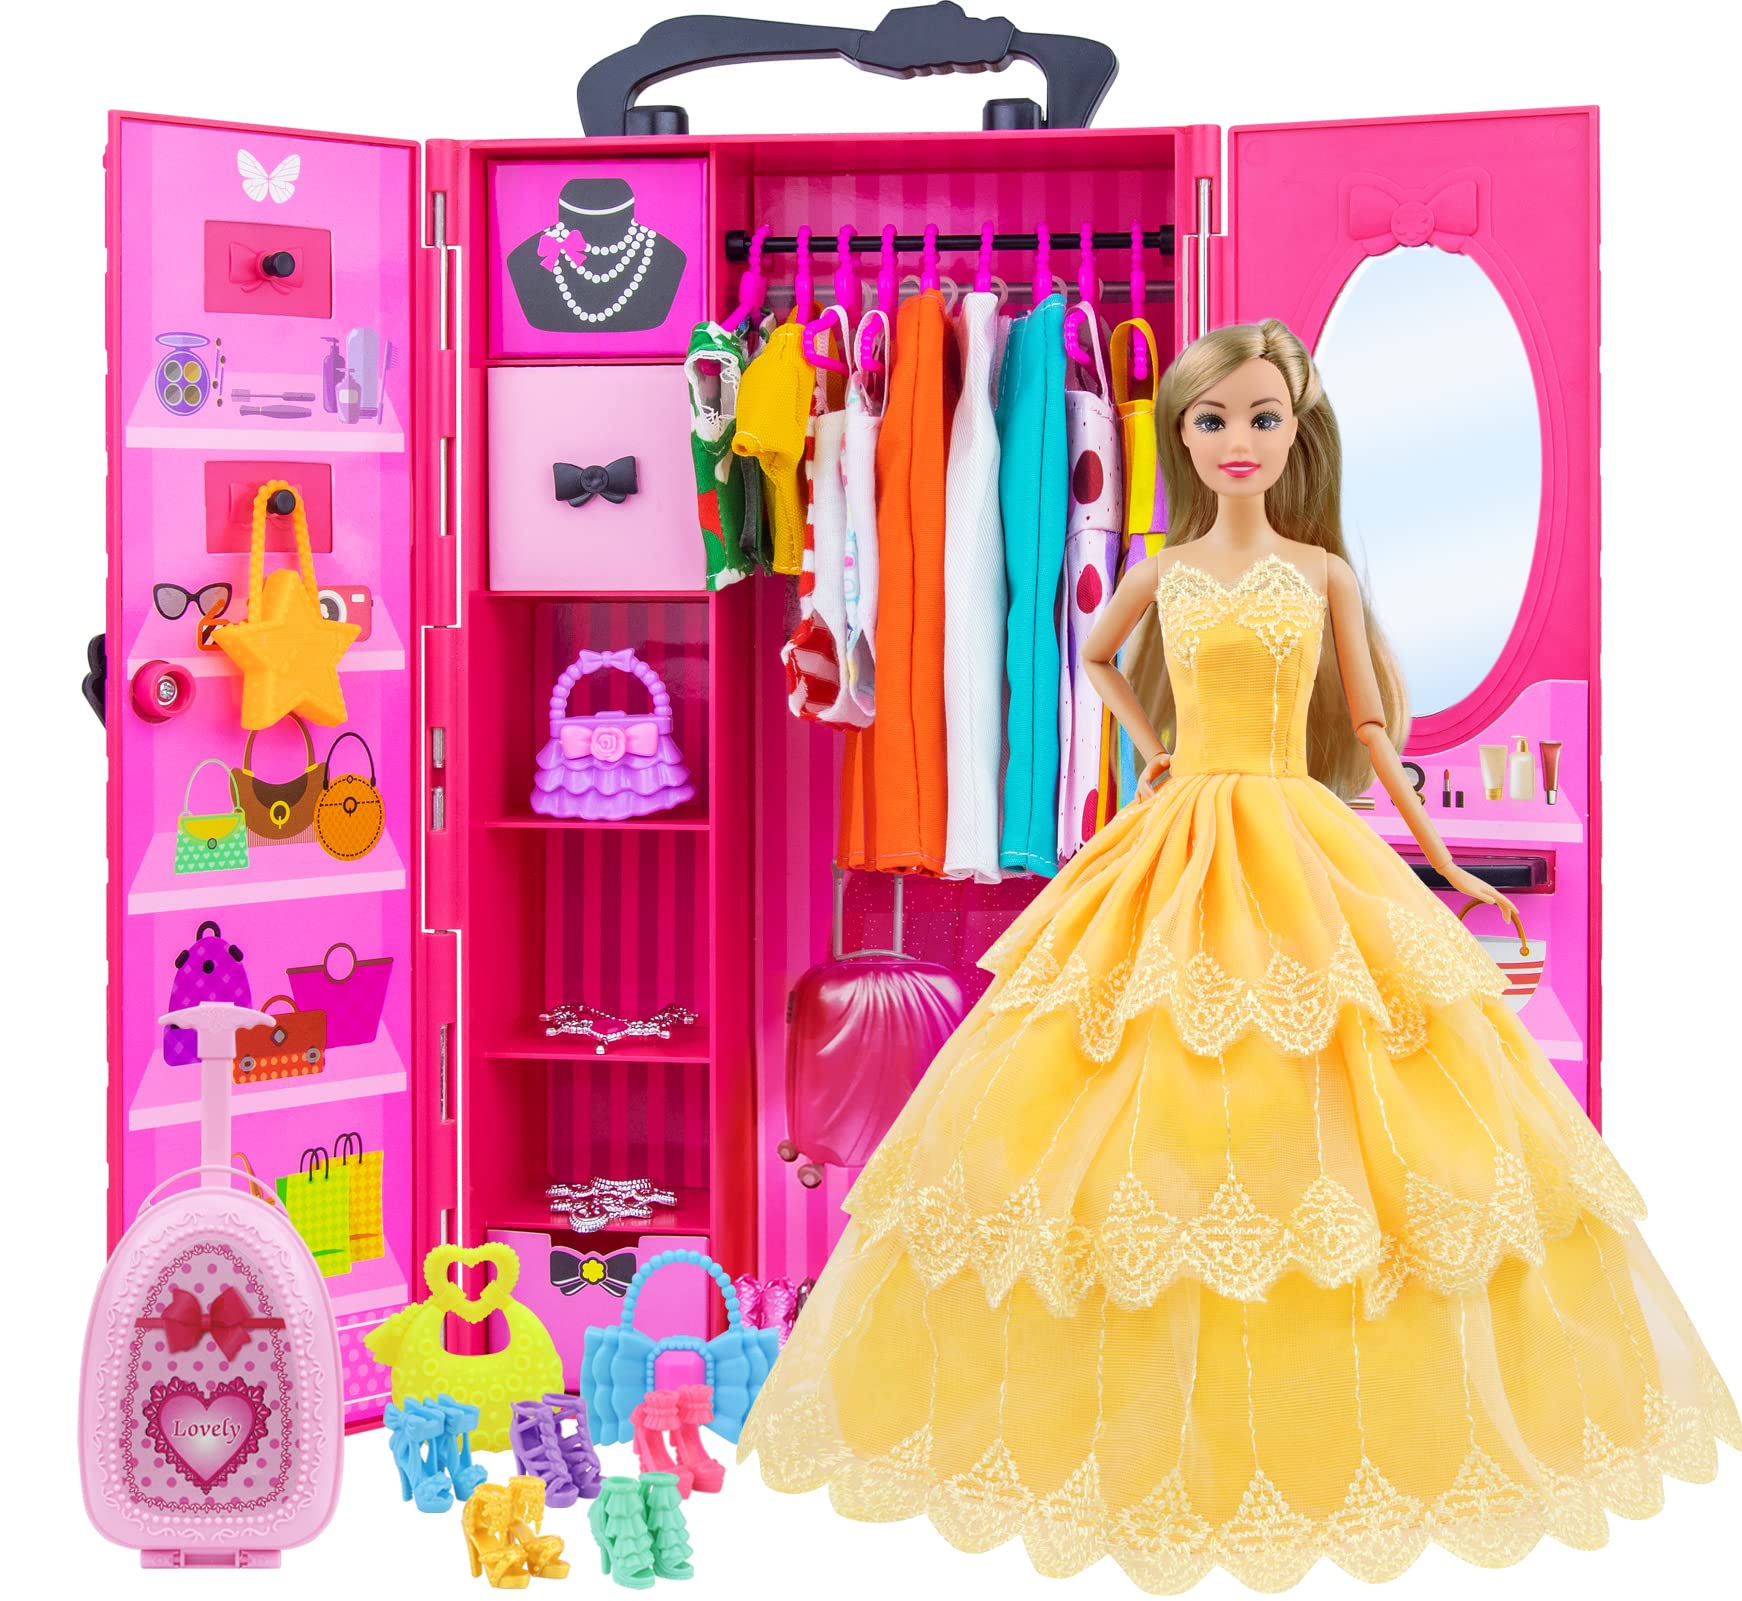 ZITA ELEMENT 11.5 Inch Girl Doll Closet Wardrobe with Clothes and Accessories Set 101 Pcs Including Wardrobe Suitcase Clothes Dresses Swimsuits Shoes Hangers Necklace Bags and Other Stuff